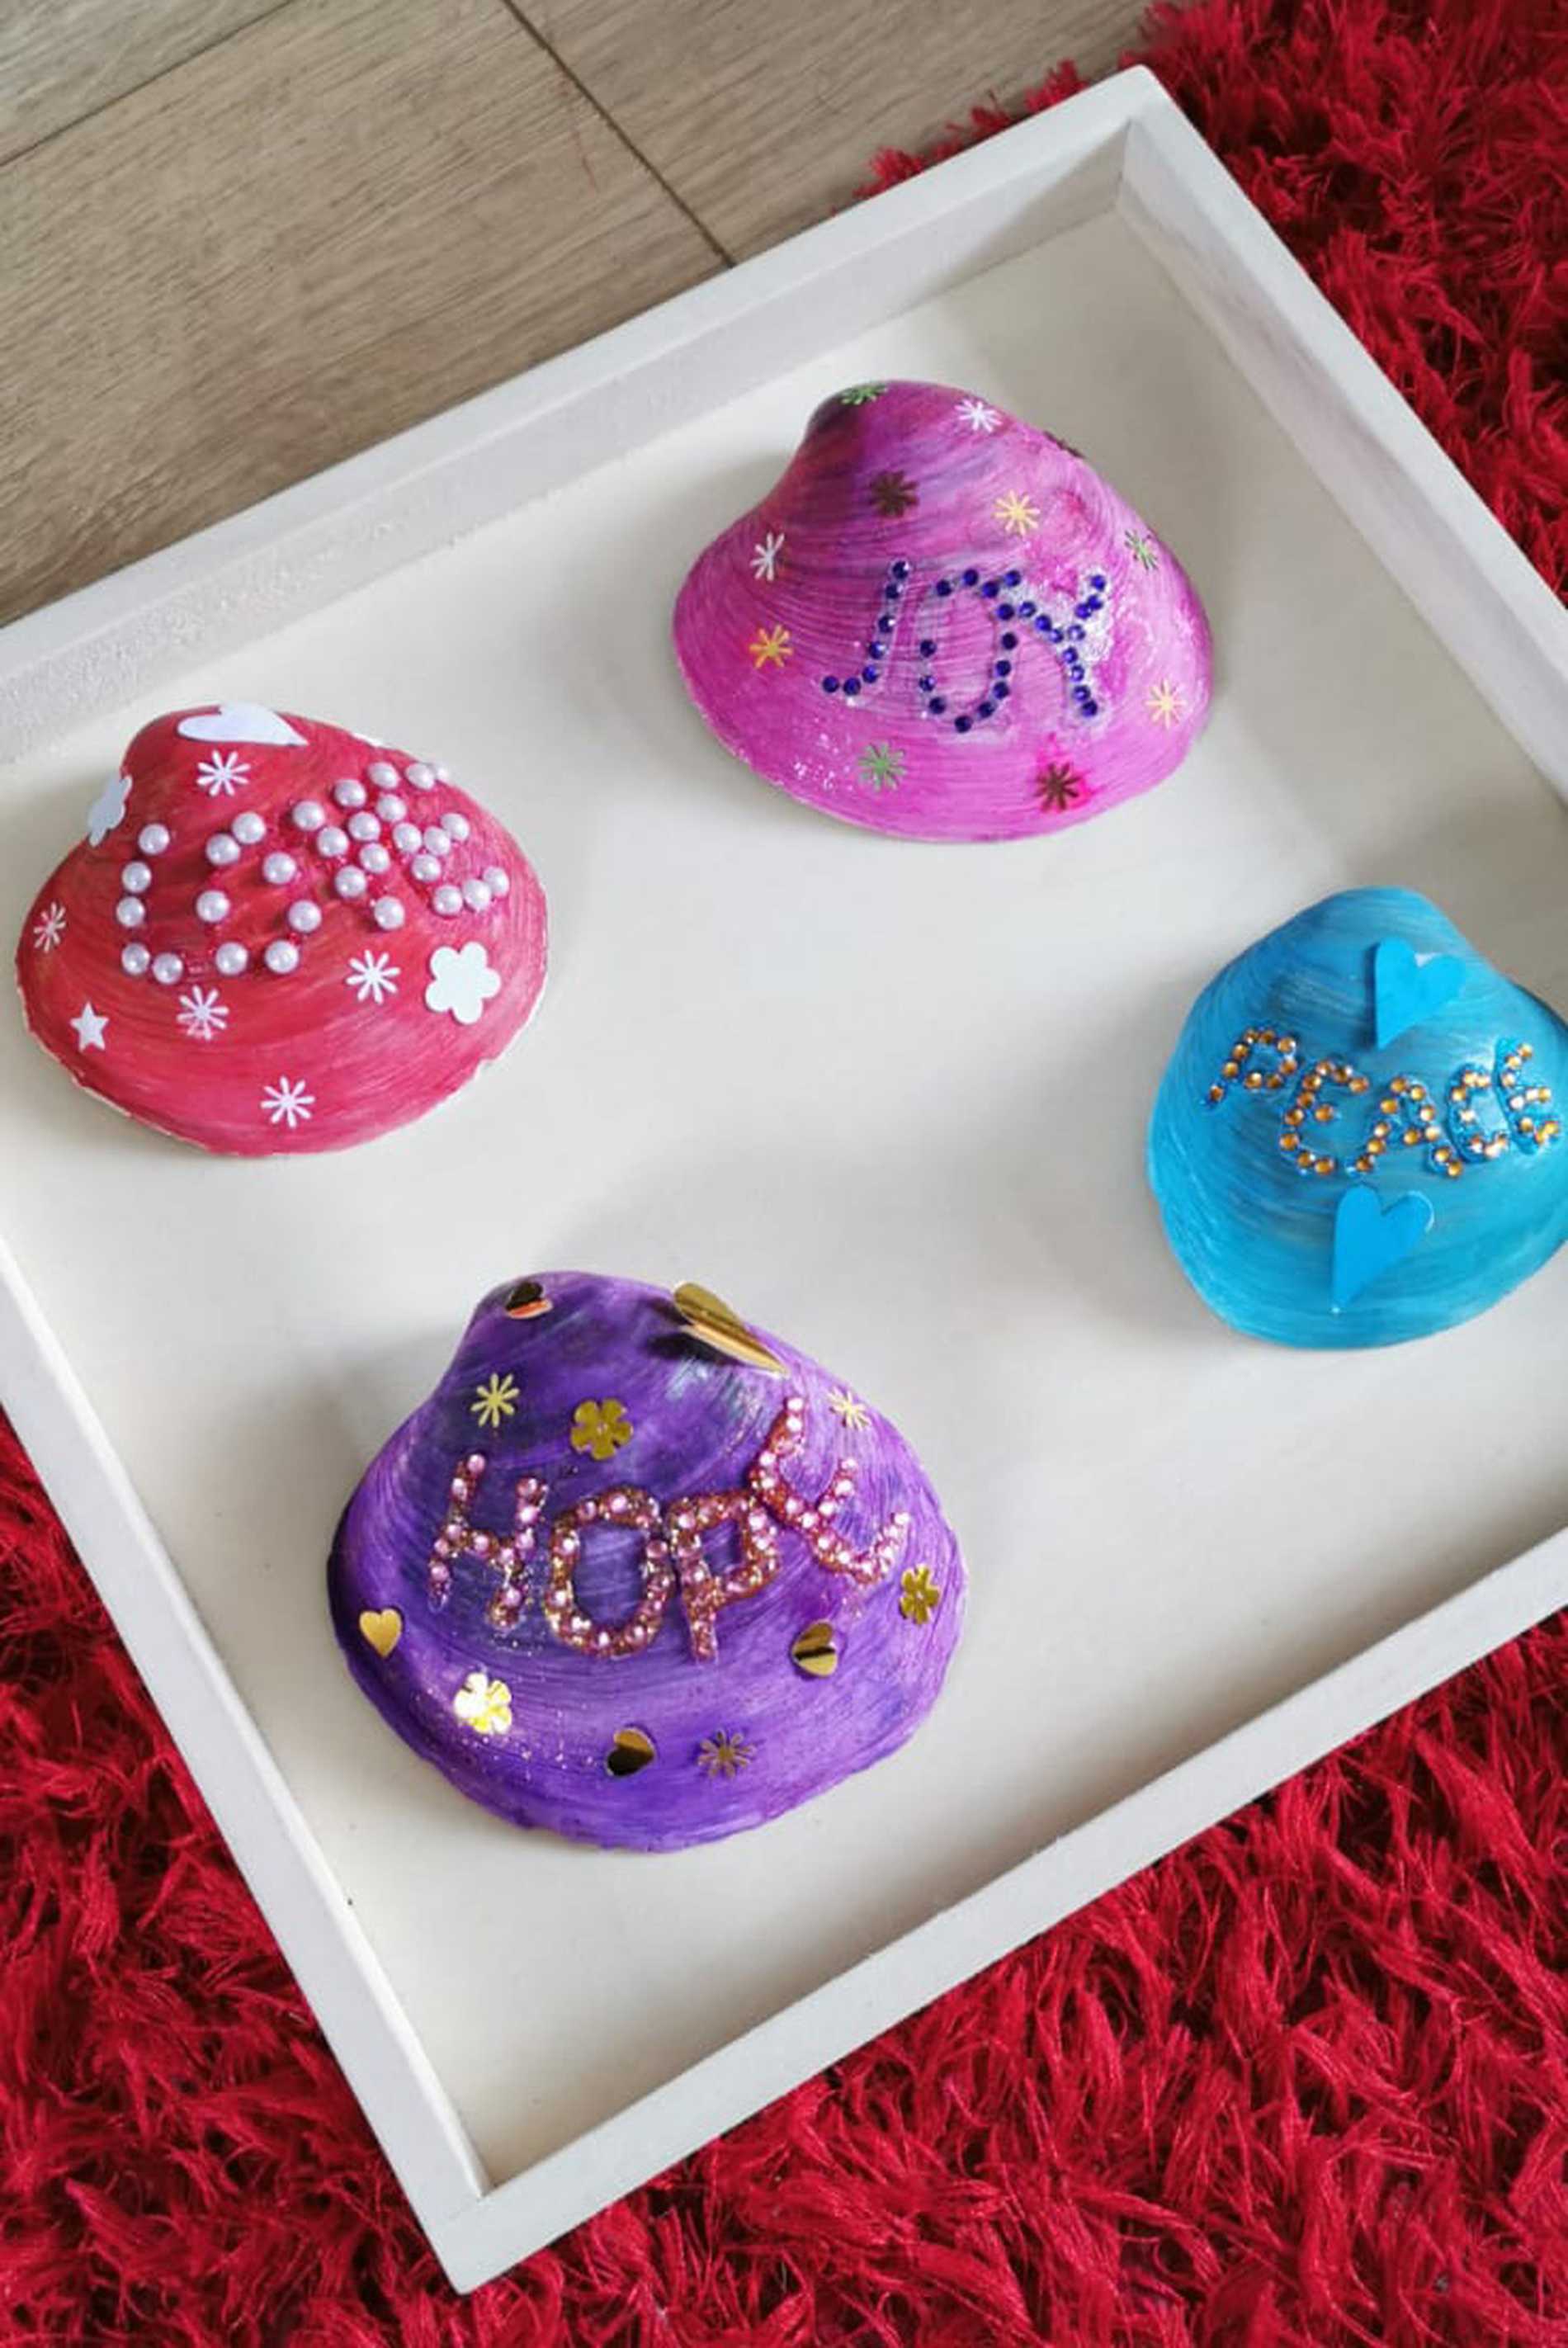 Some colourful painted and decorated shells, Bethany created with her new art station.